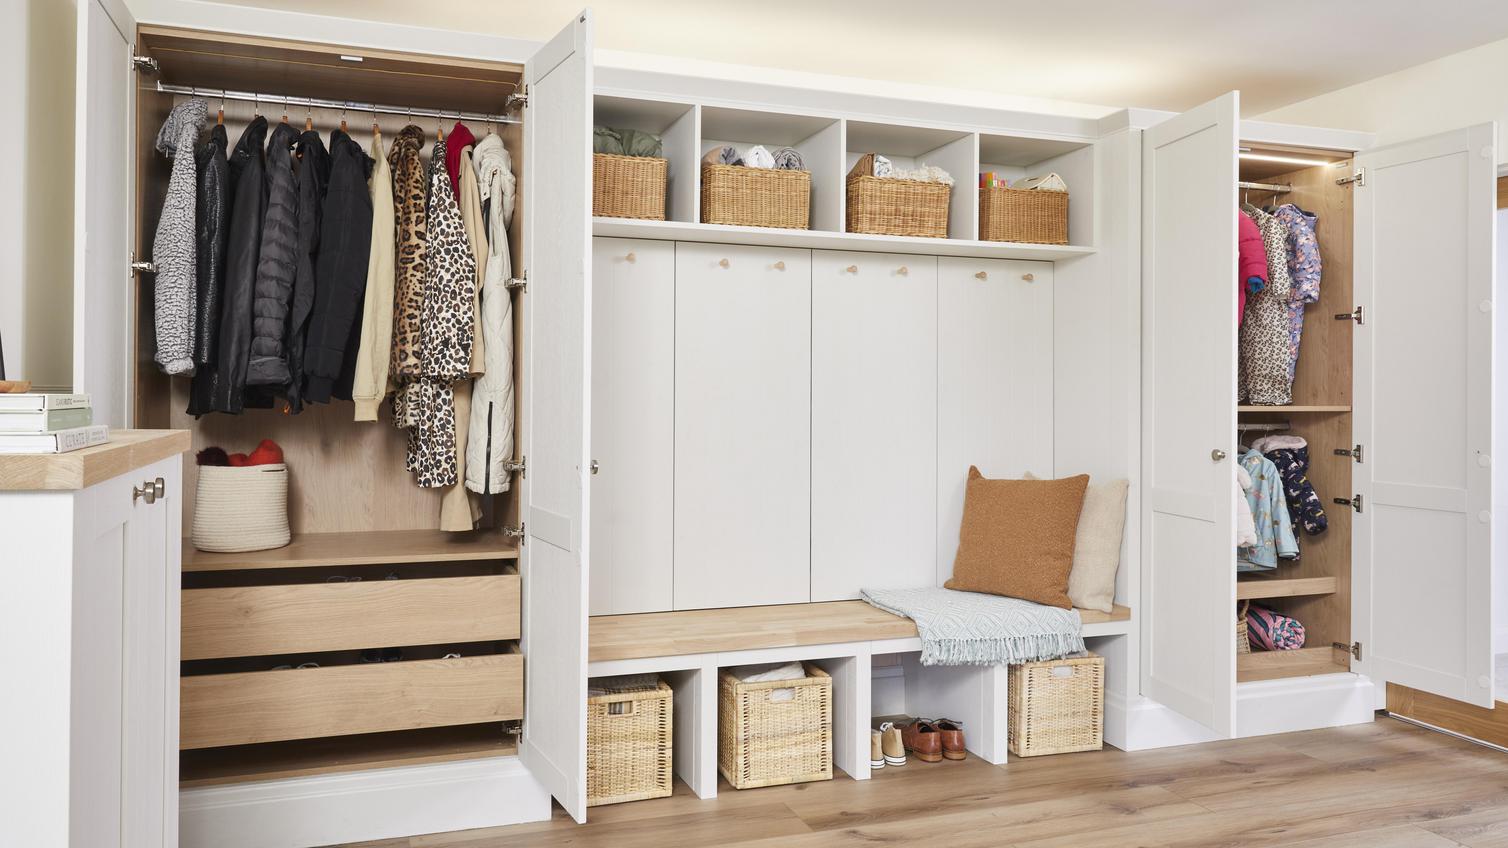 Built in storage solutions, hidden behind white cabinetry